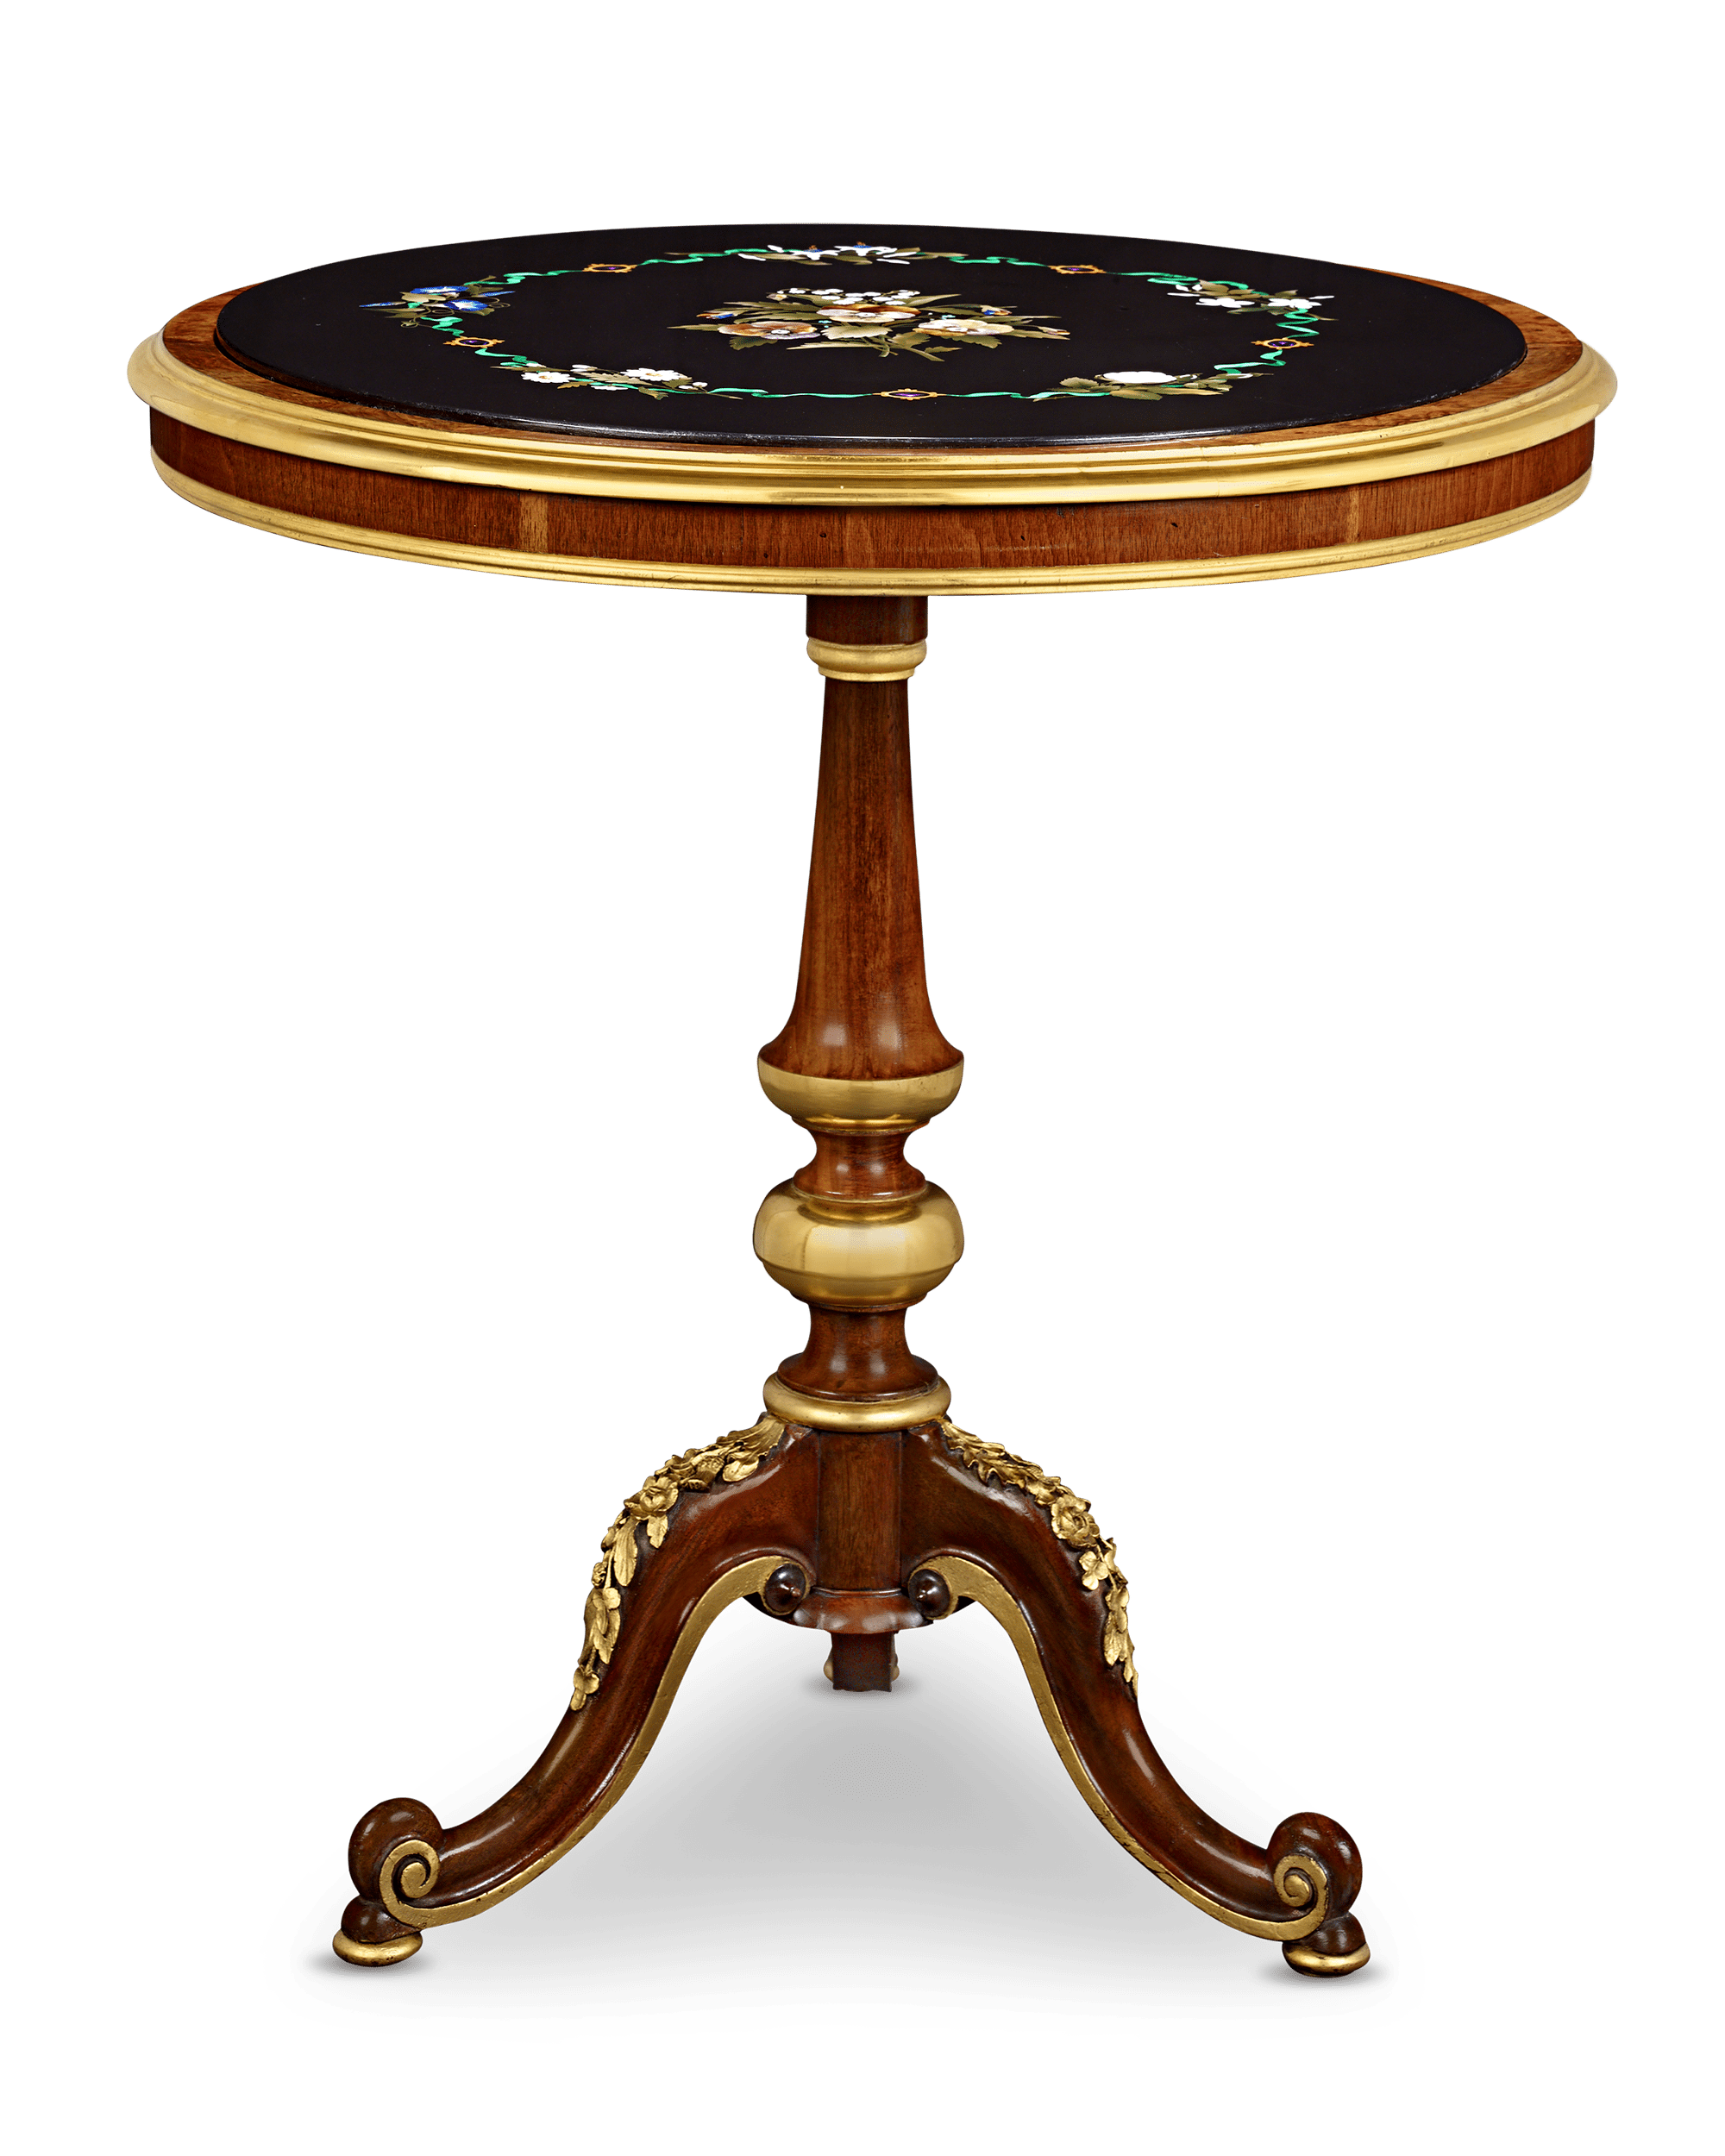 Royal Palace of Holyroodhouse Pietre Dure Table